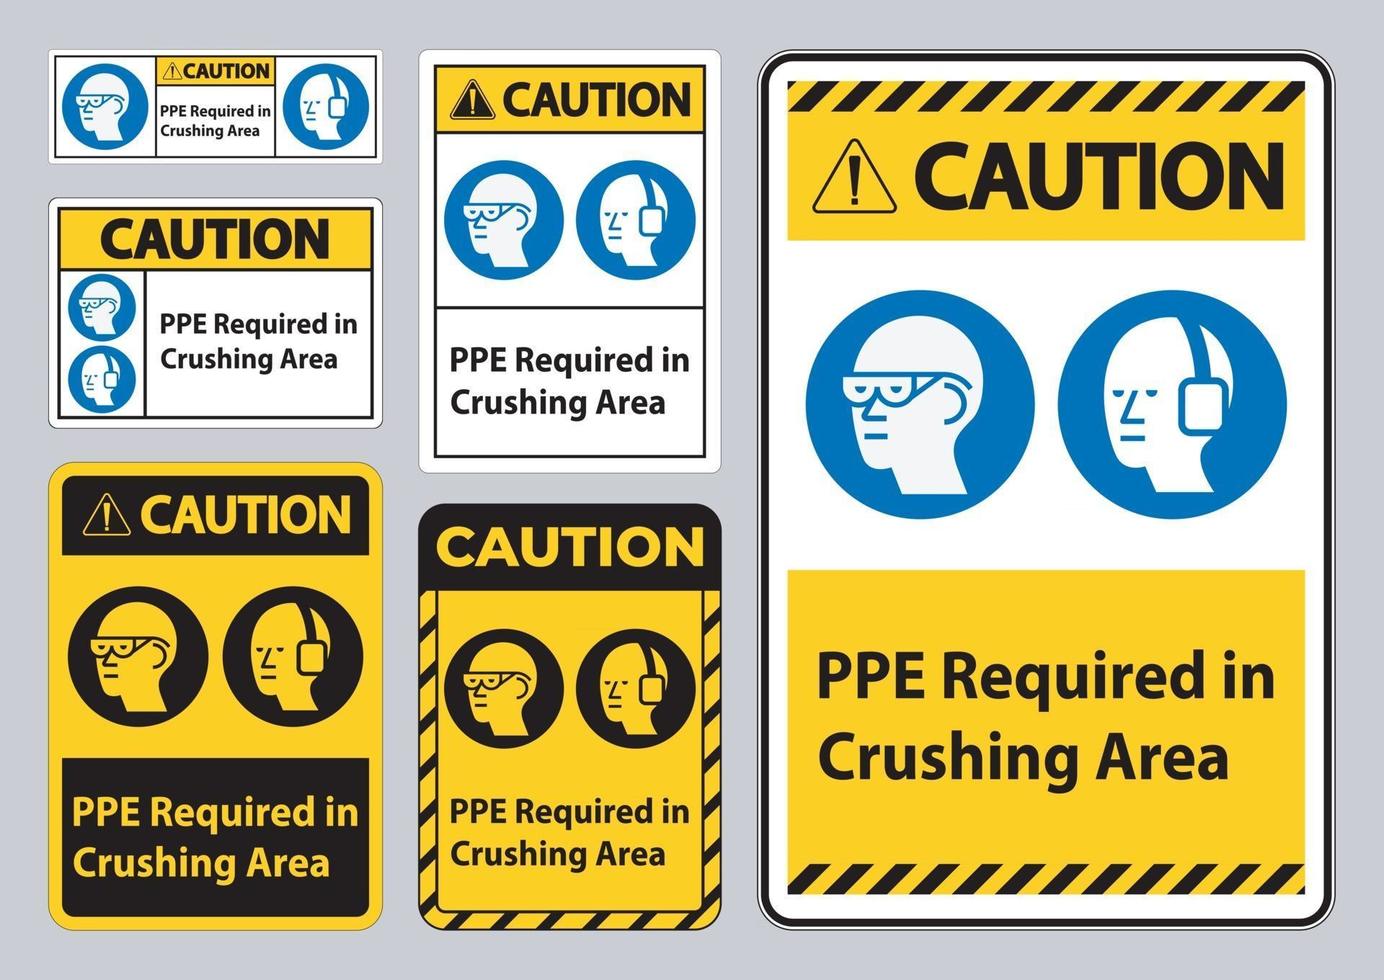 Caution Sign PPE Required In Crushing Area Isolate on White Background vector